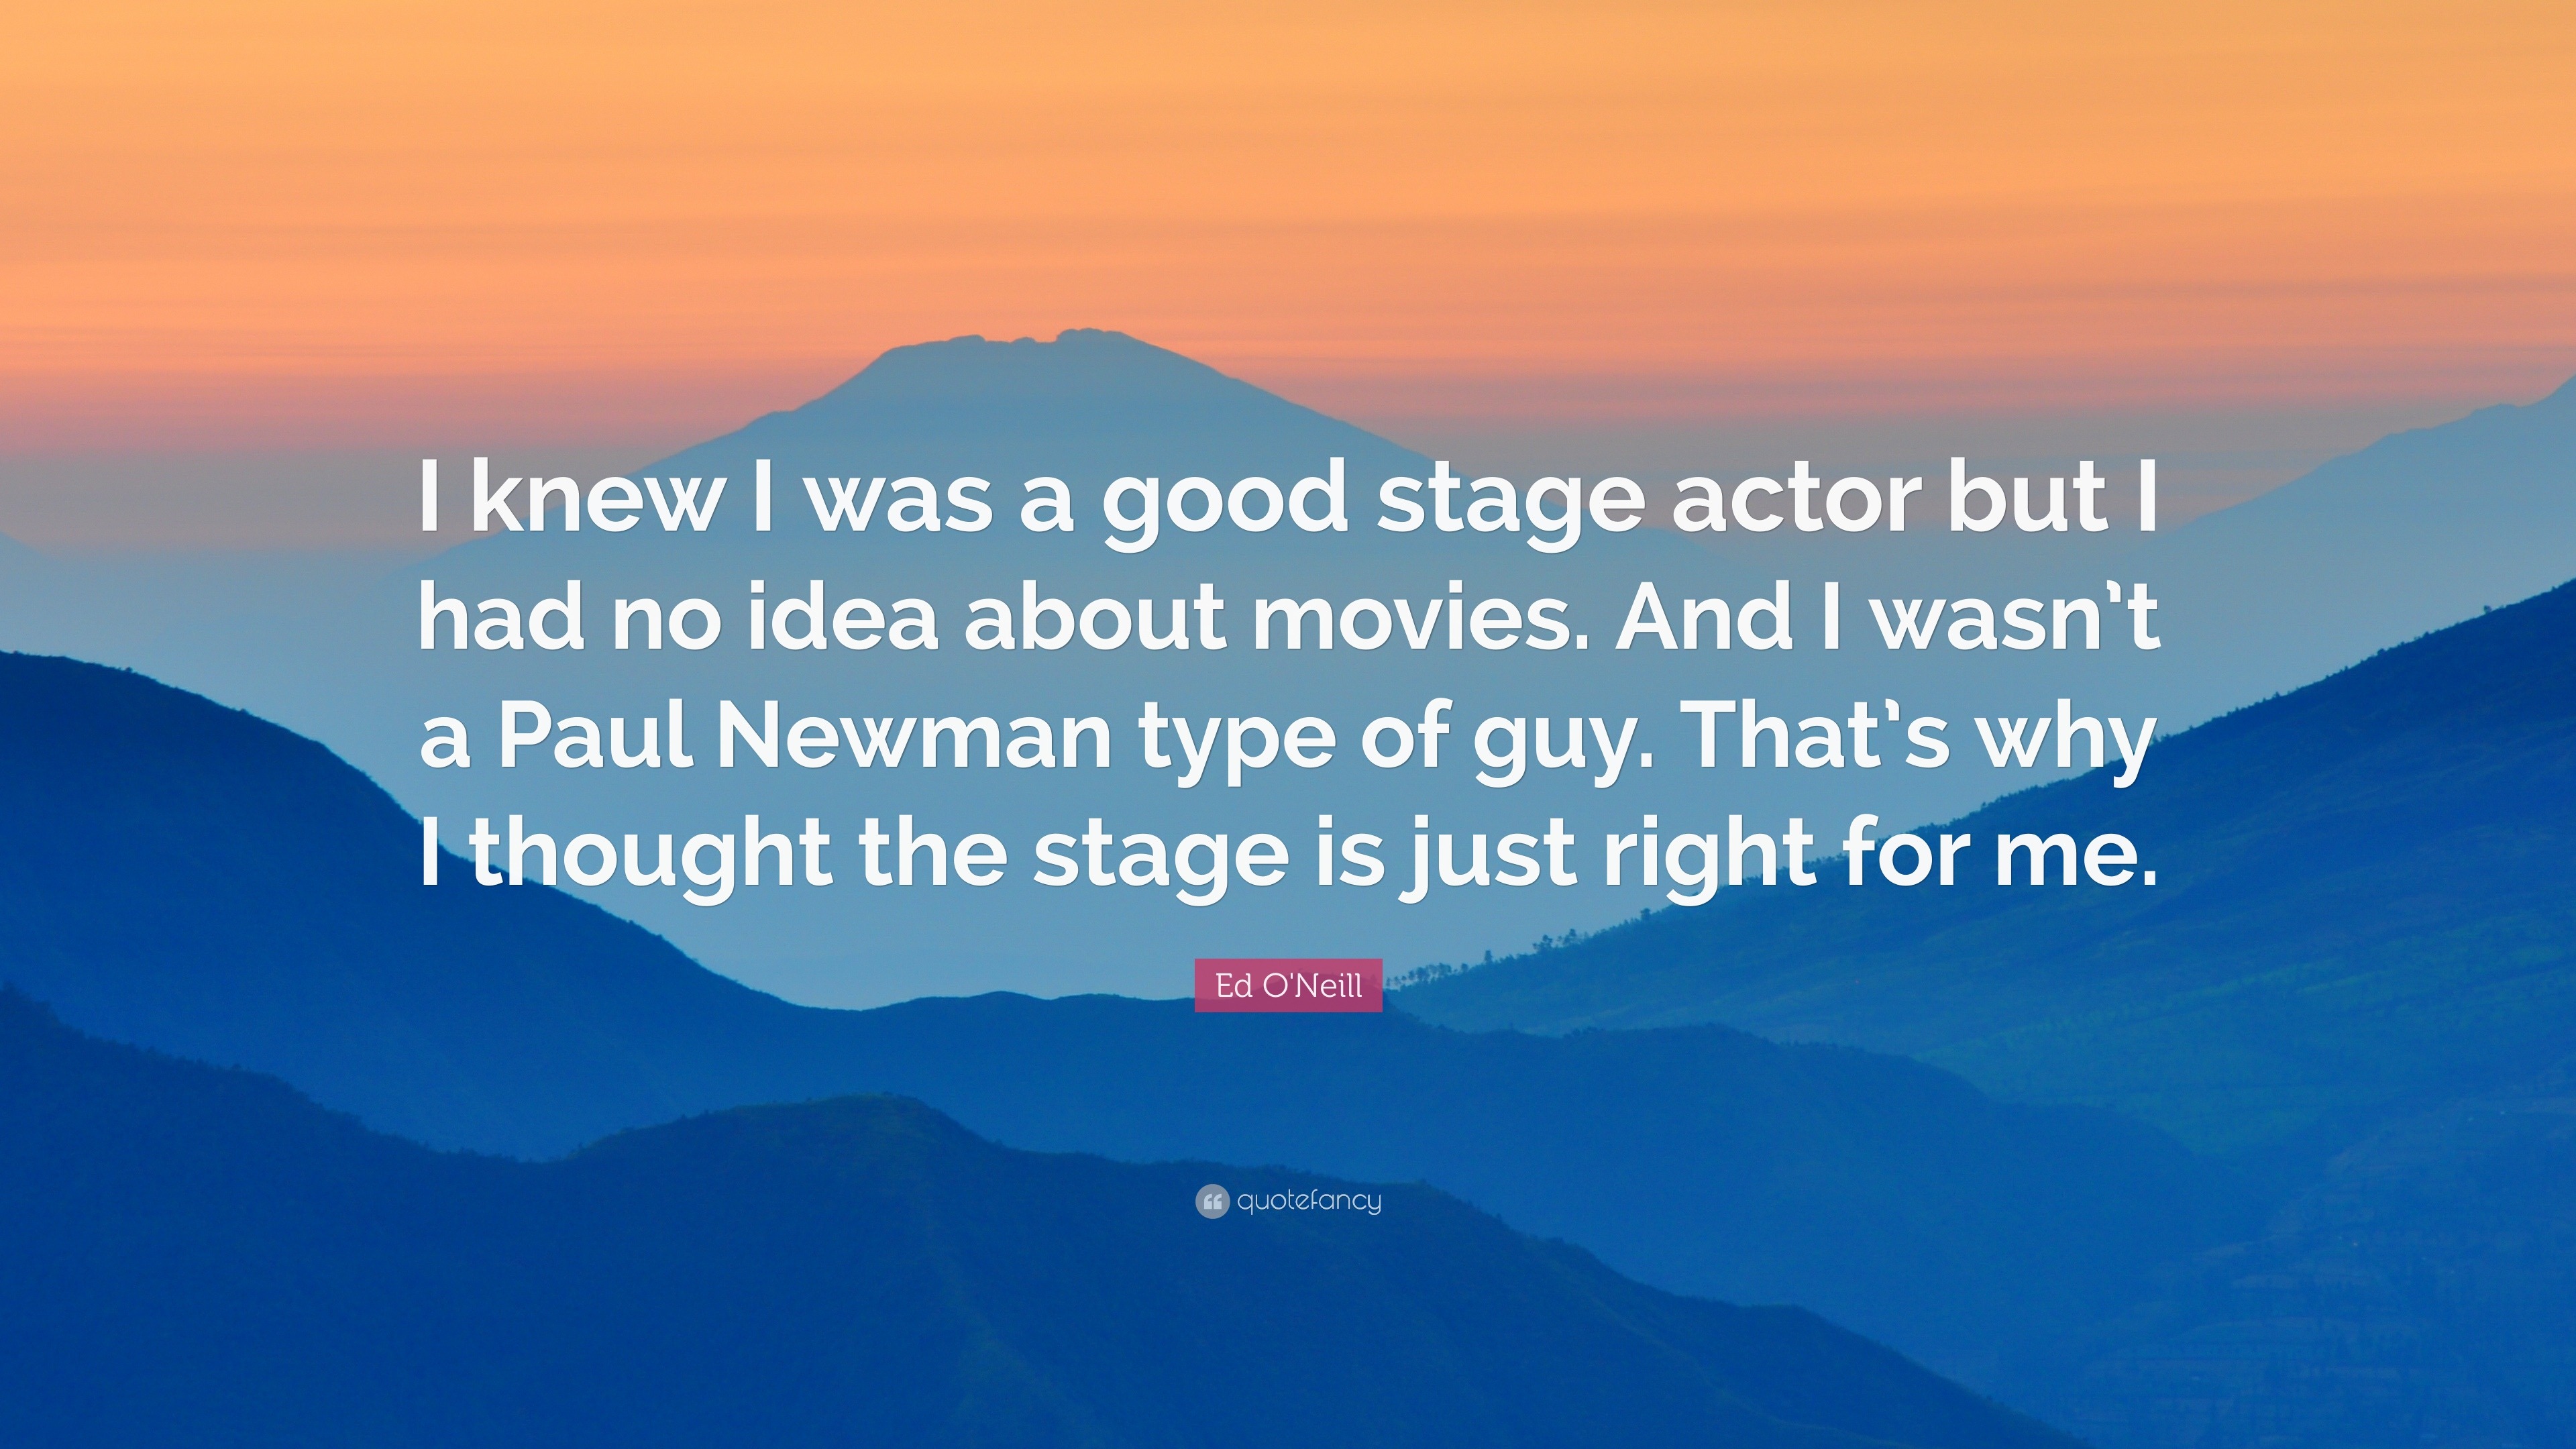 Ed O'Neill Quote: “I knew I was a good stage actor but I had no idea about  movies. And I wasn't a Paul Newman type of guy. That's why I tho”